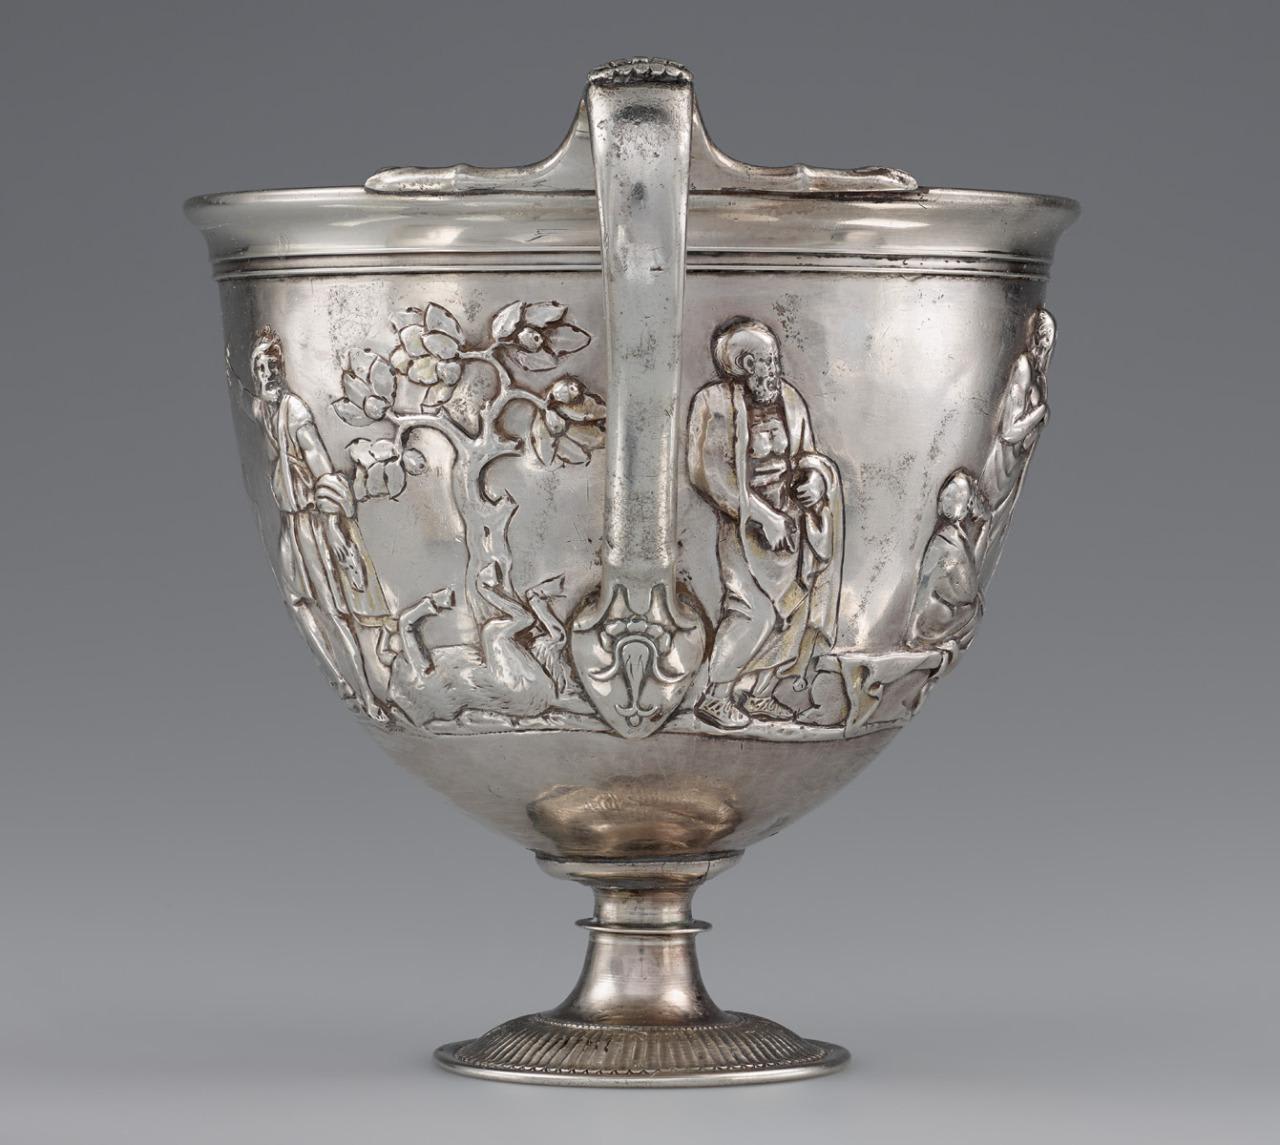 A Silver Cup with Odysseus in the Underworld. Date: 25 B.C.-A.D. 100.